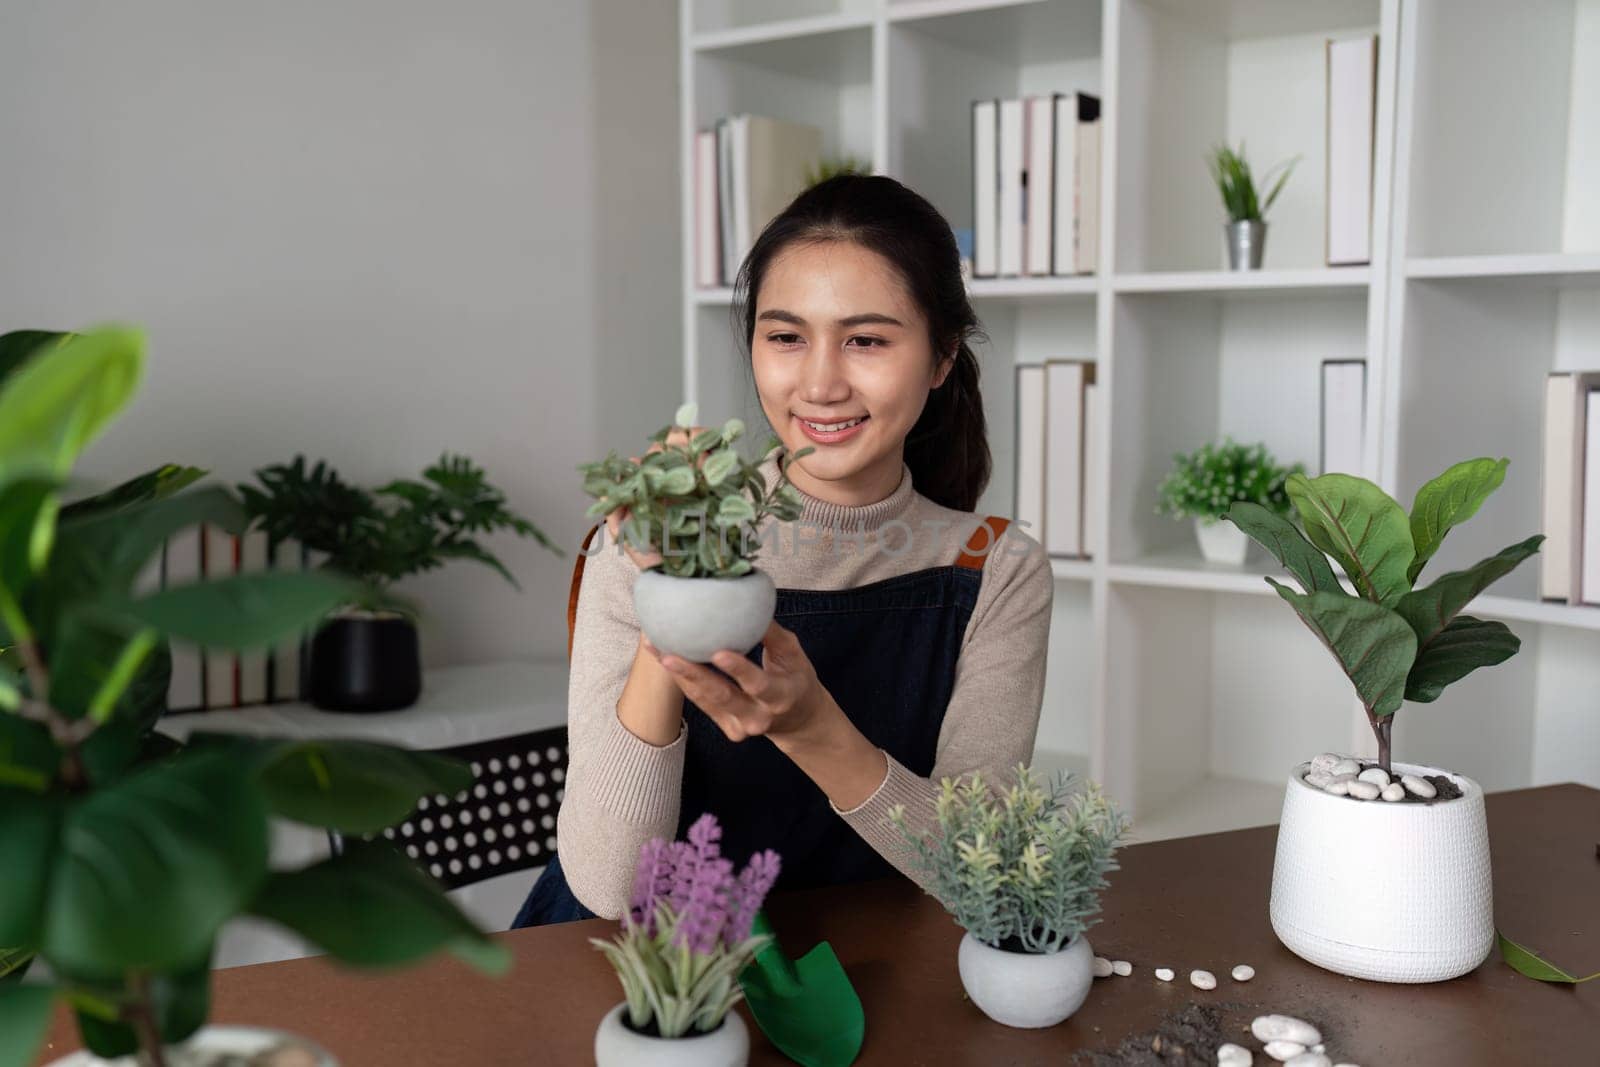 Young Asian woman smiling friendly holding flower pot with green plant house and looking in living room. Concept of home garden. Taking care of home plants.